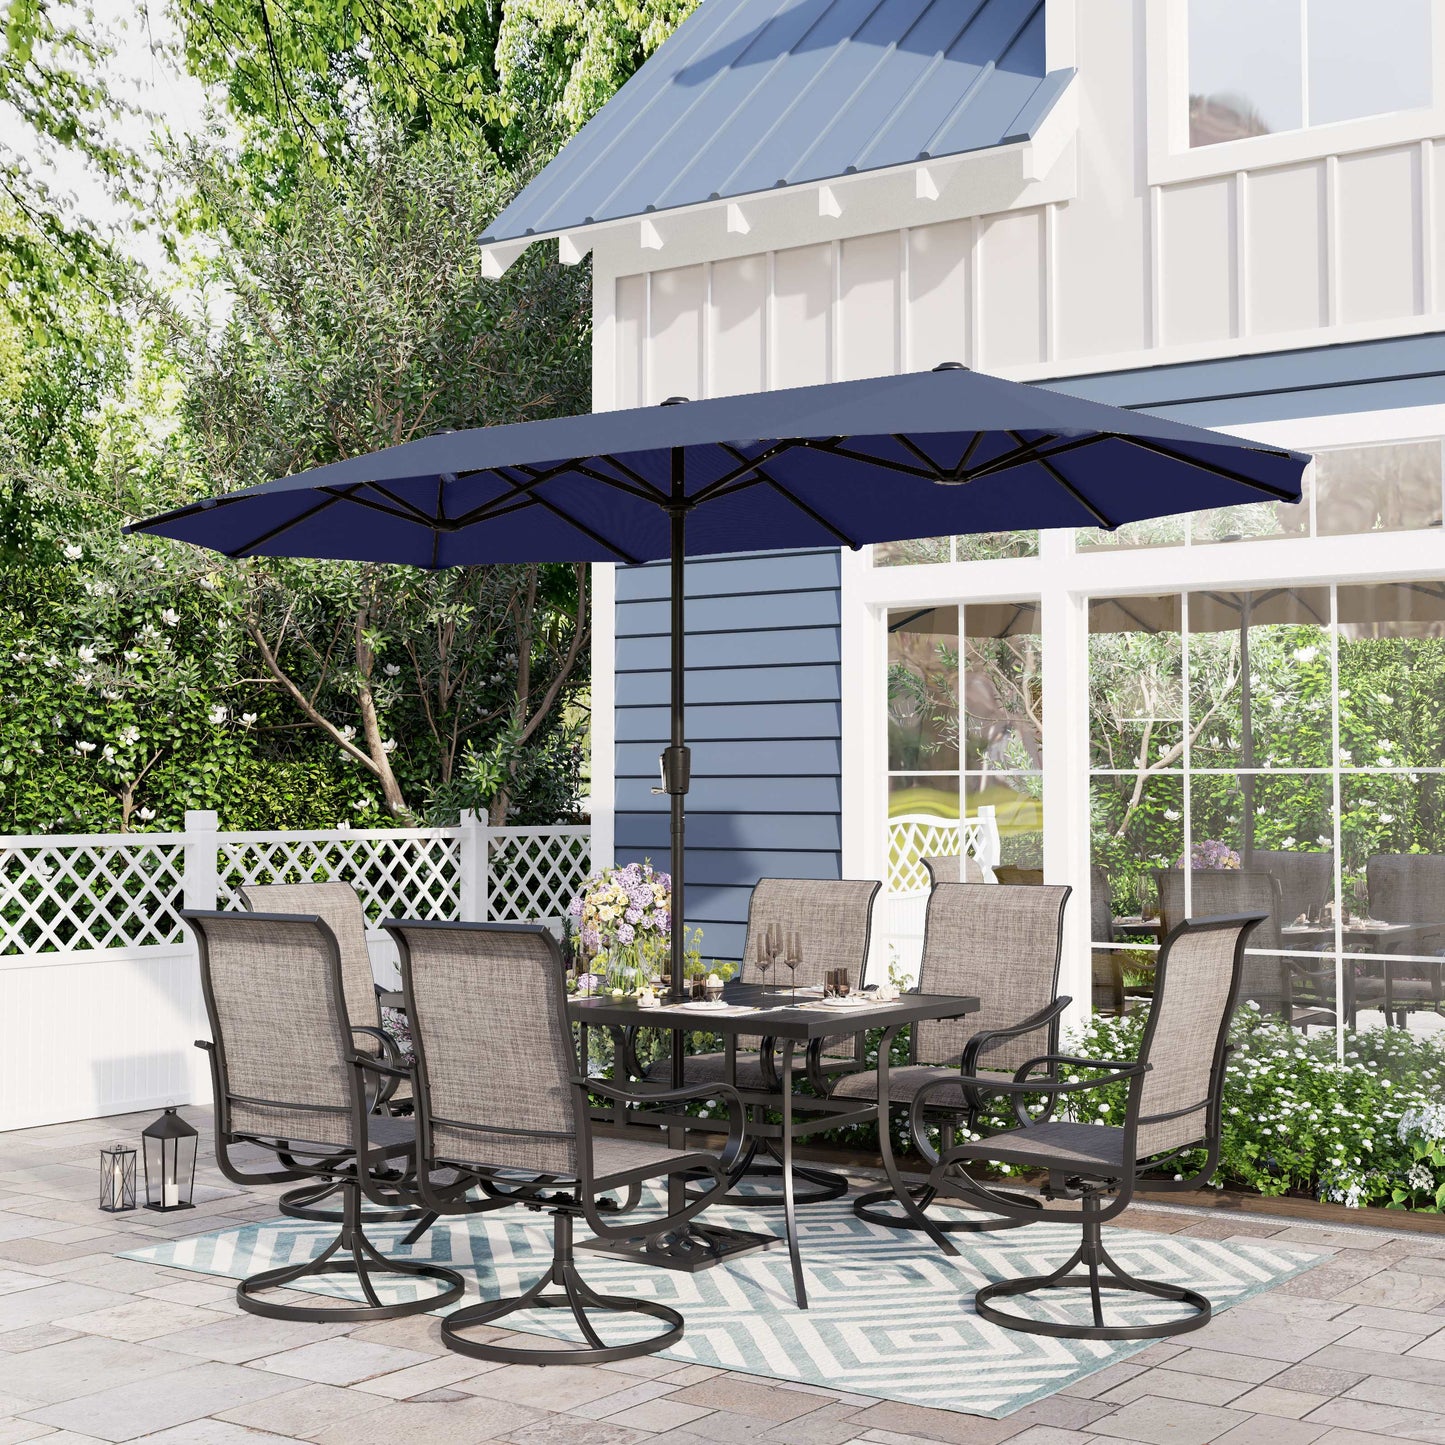 Sophia & William 8-Piece Outdoor Patio Dining Set with 13 ft Navy Umbrella, Textilene Chairs & Rectangle Table for 6